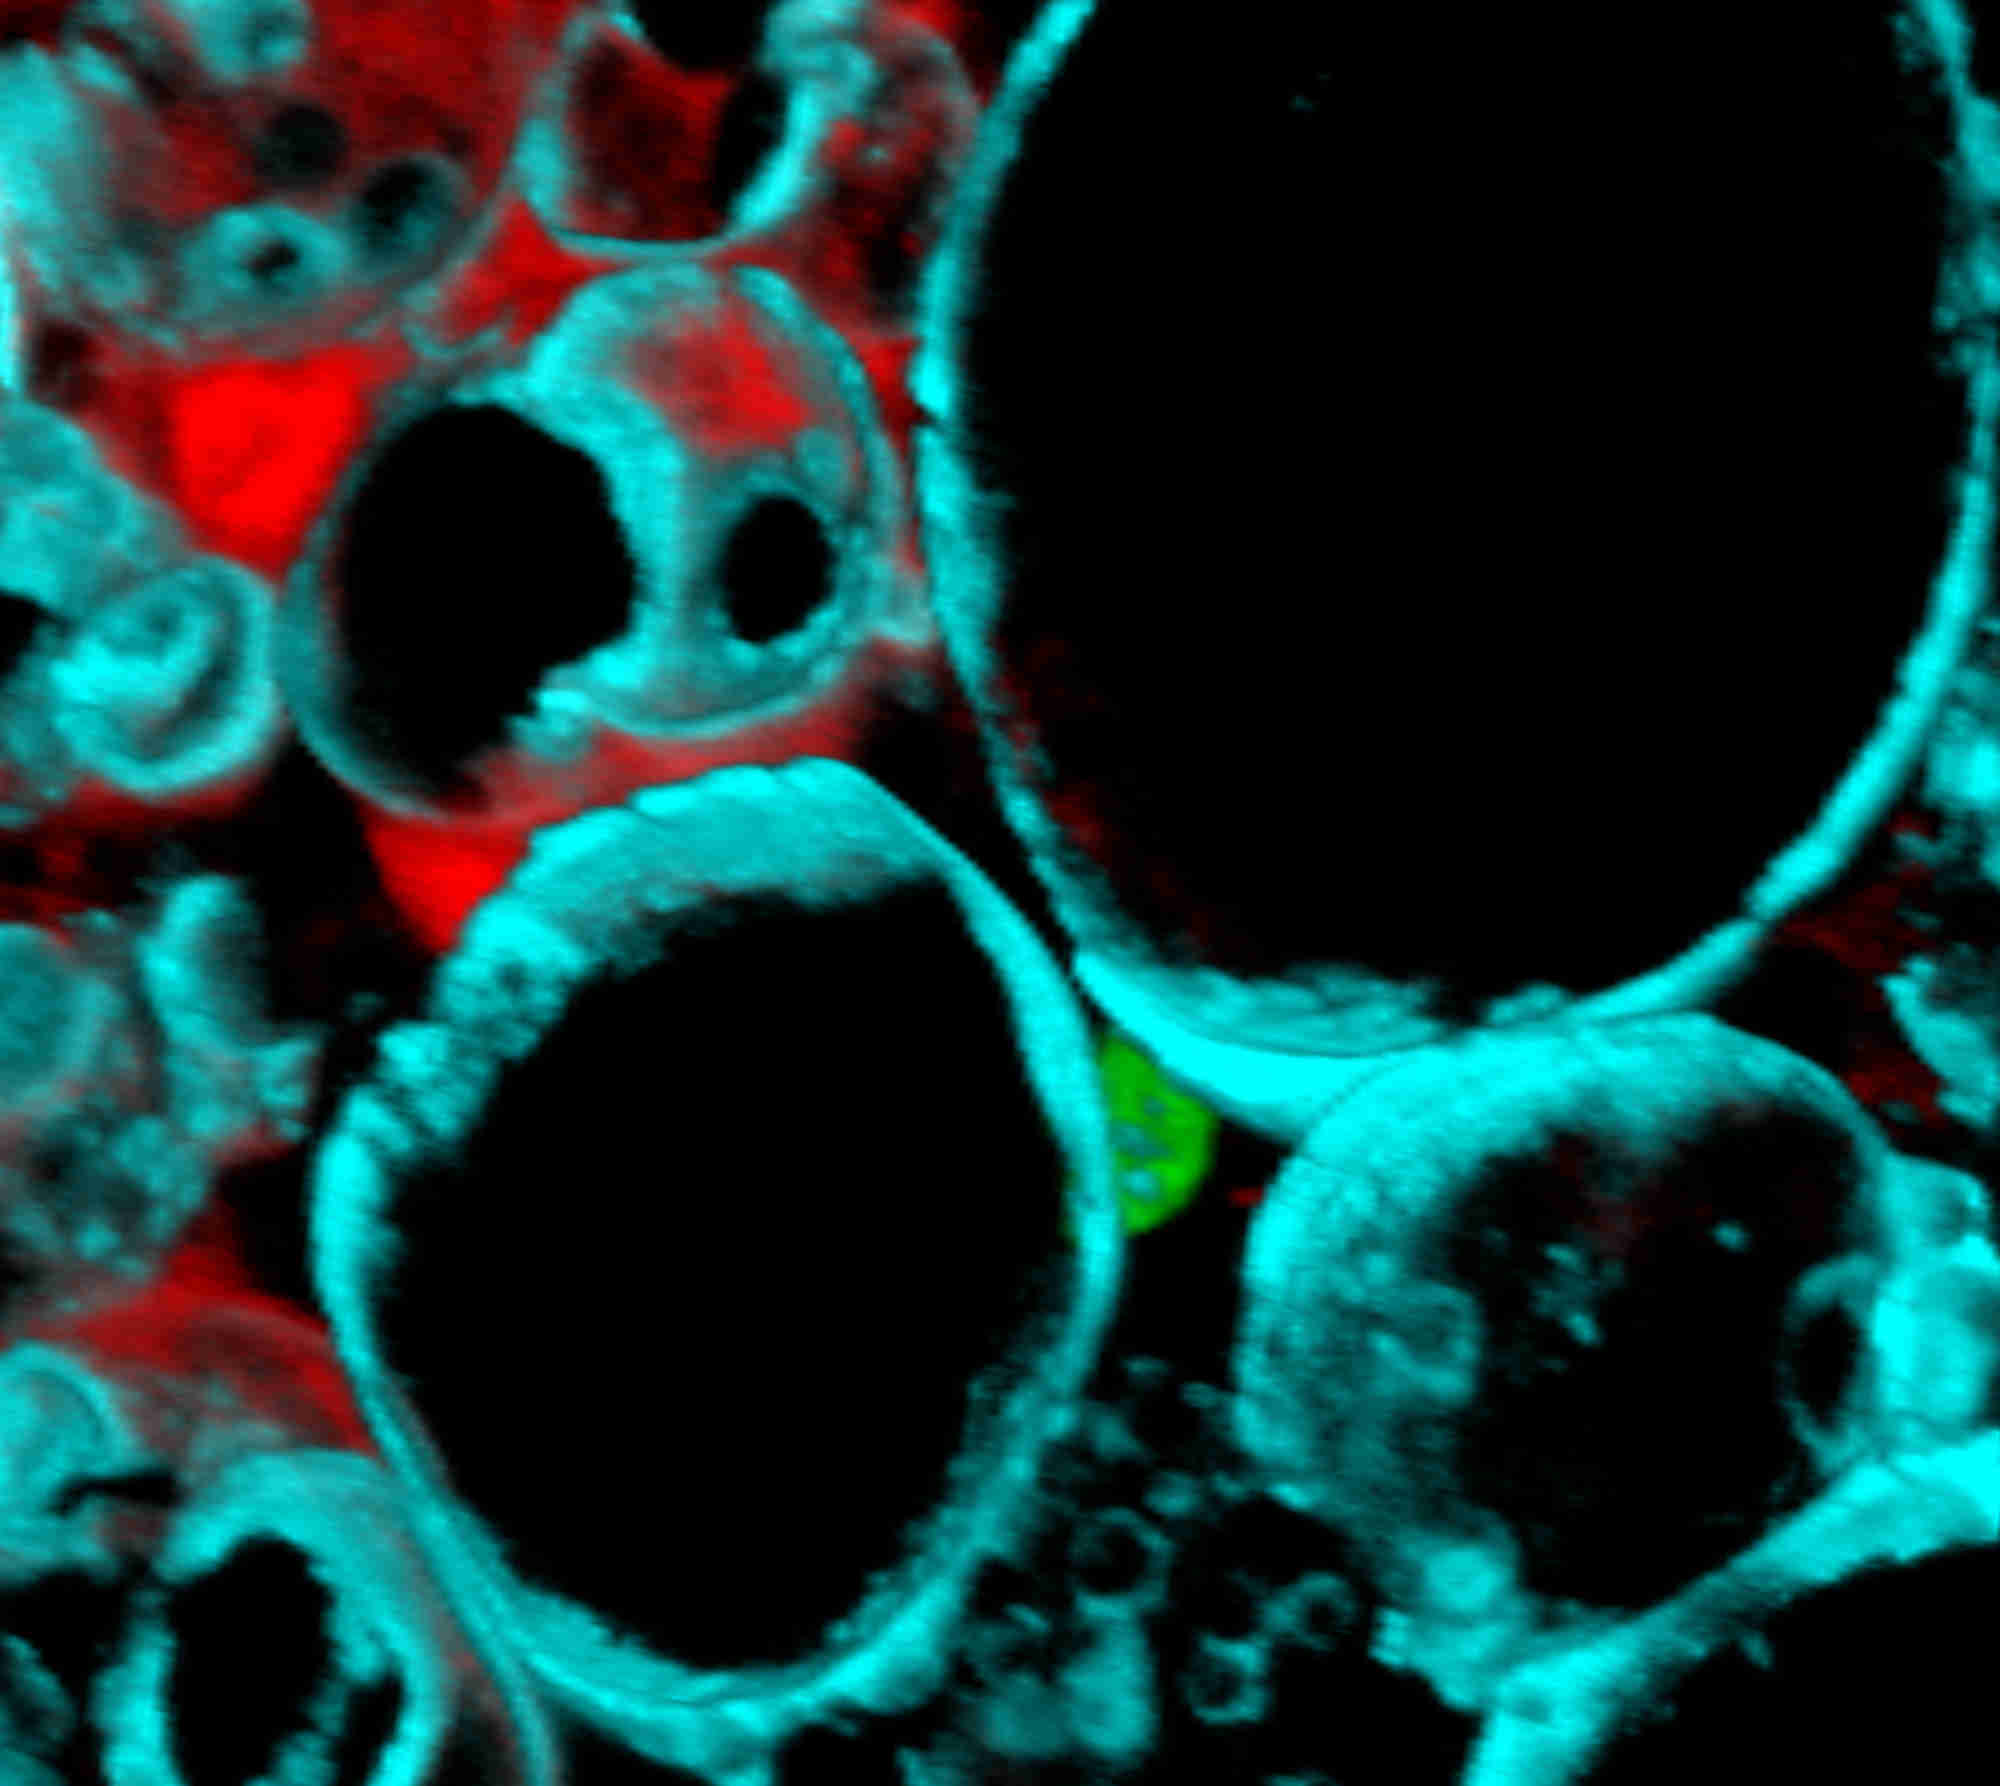 3D rendering of a 100-&#181;m thick section of murine adipose tissue in the kidney. Immunoﬂuorescent staining for the lipid droplet protein perilipin is in cyan. A lineage tracing Cre-induced tdTomato ﬂuorescent protein labels a subset of adipocytes red. In the centre, the nucleus of a resident adipose stem cell is labelled green. &#169;J. Rochford